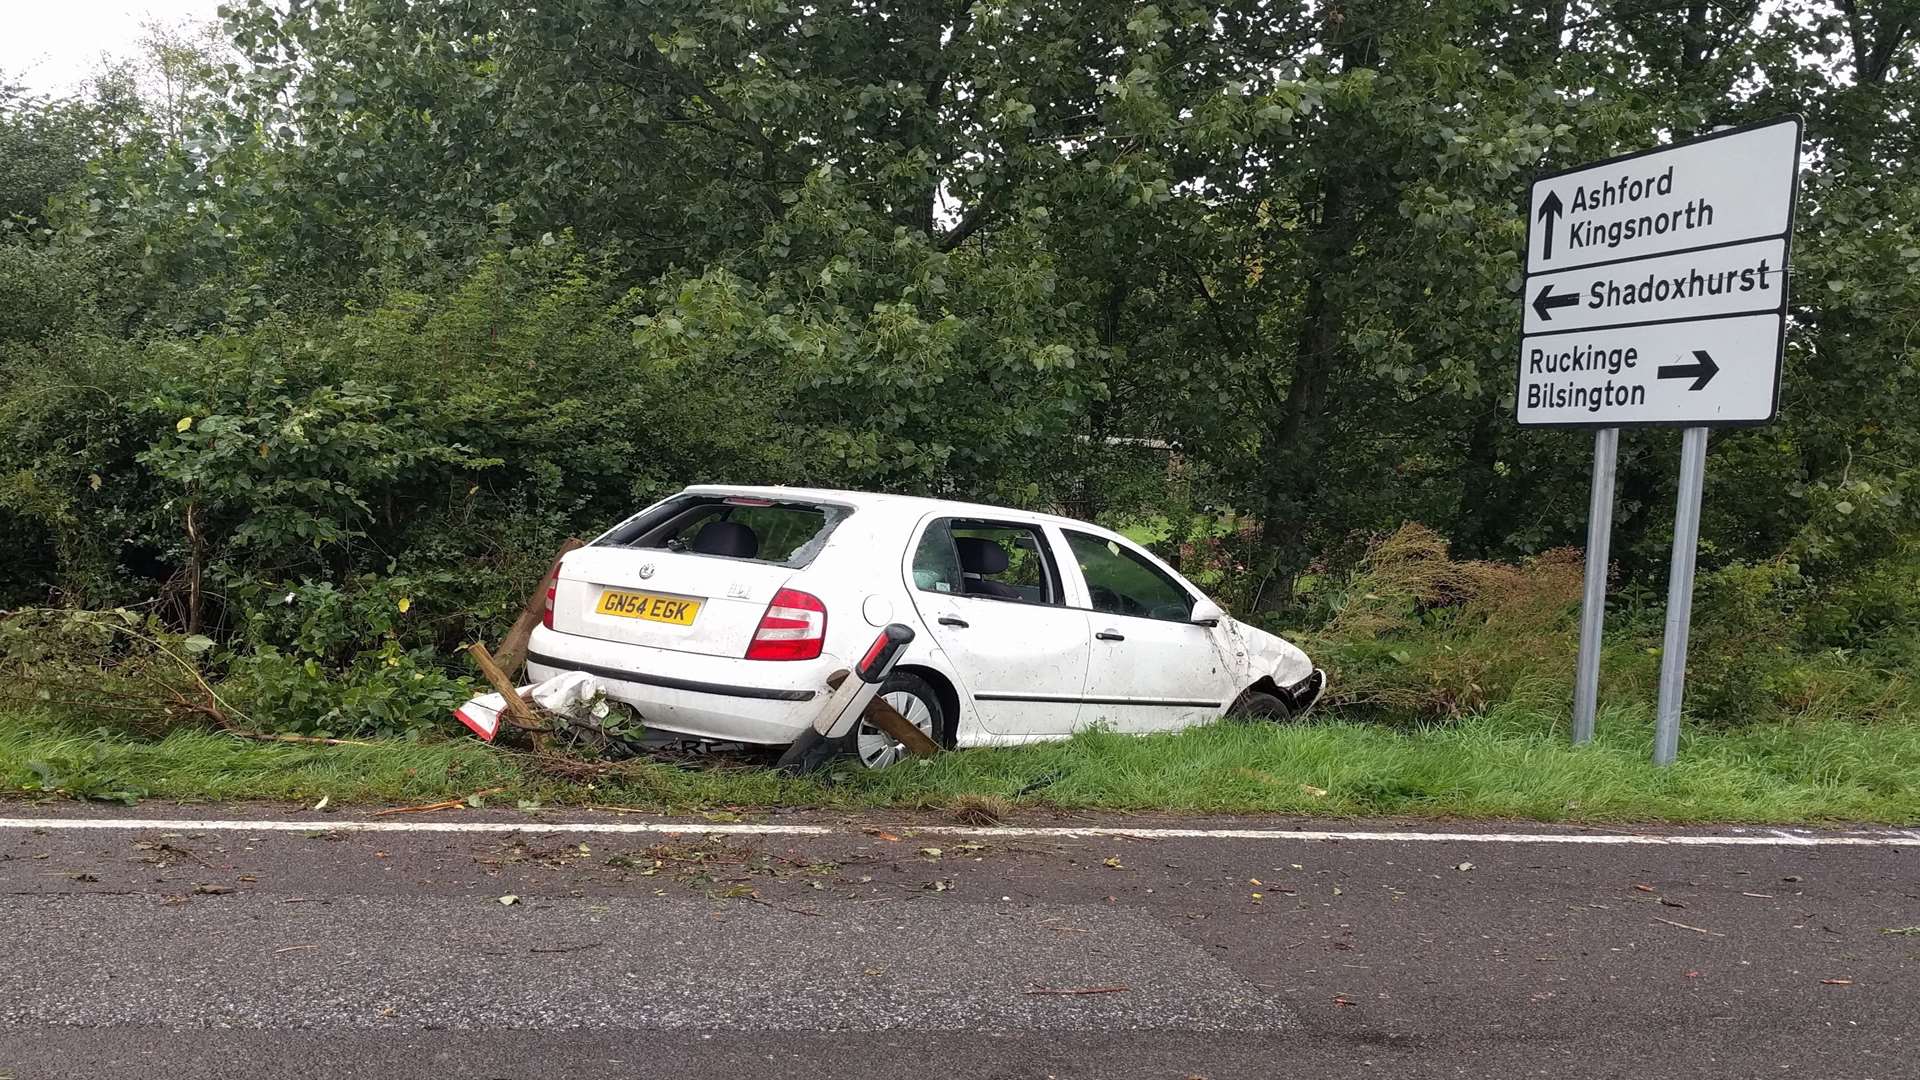 A car ended up on the grass after crashing